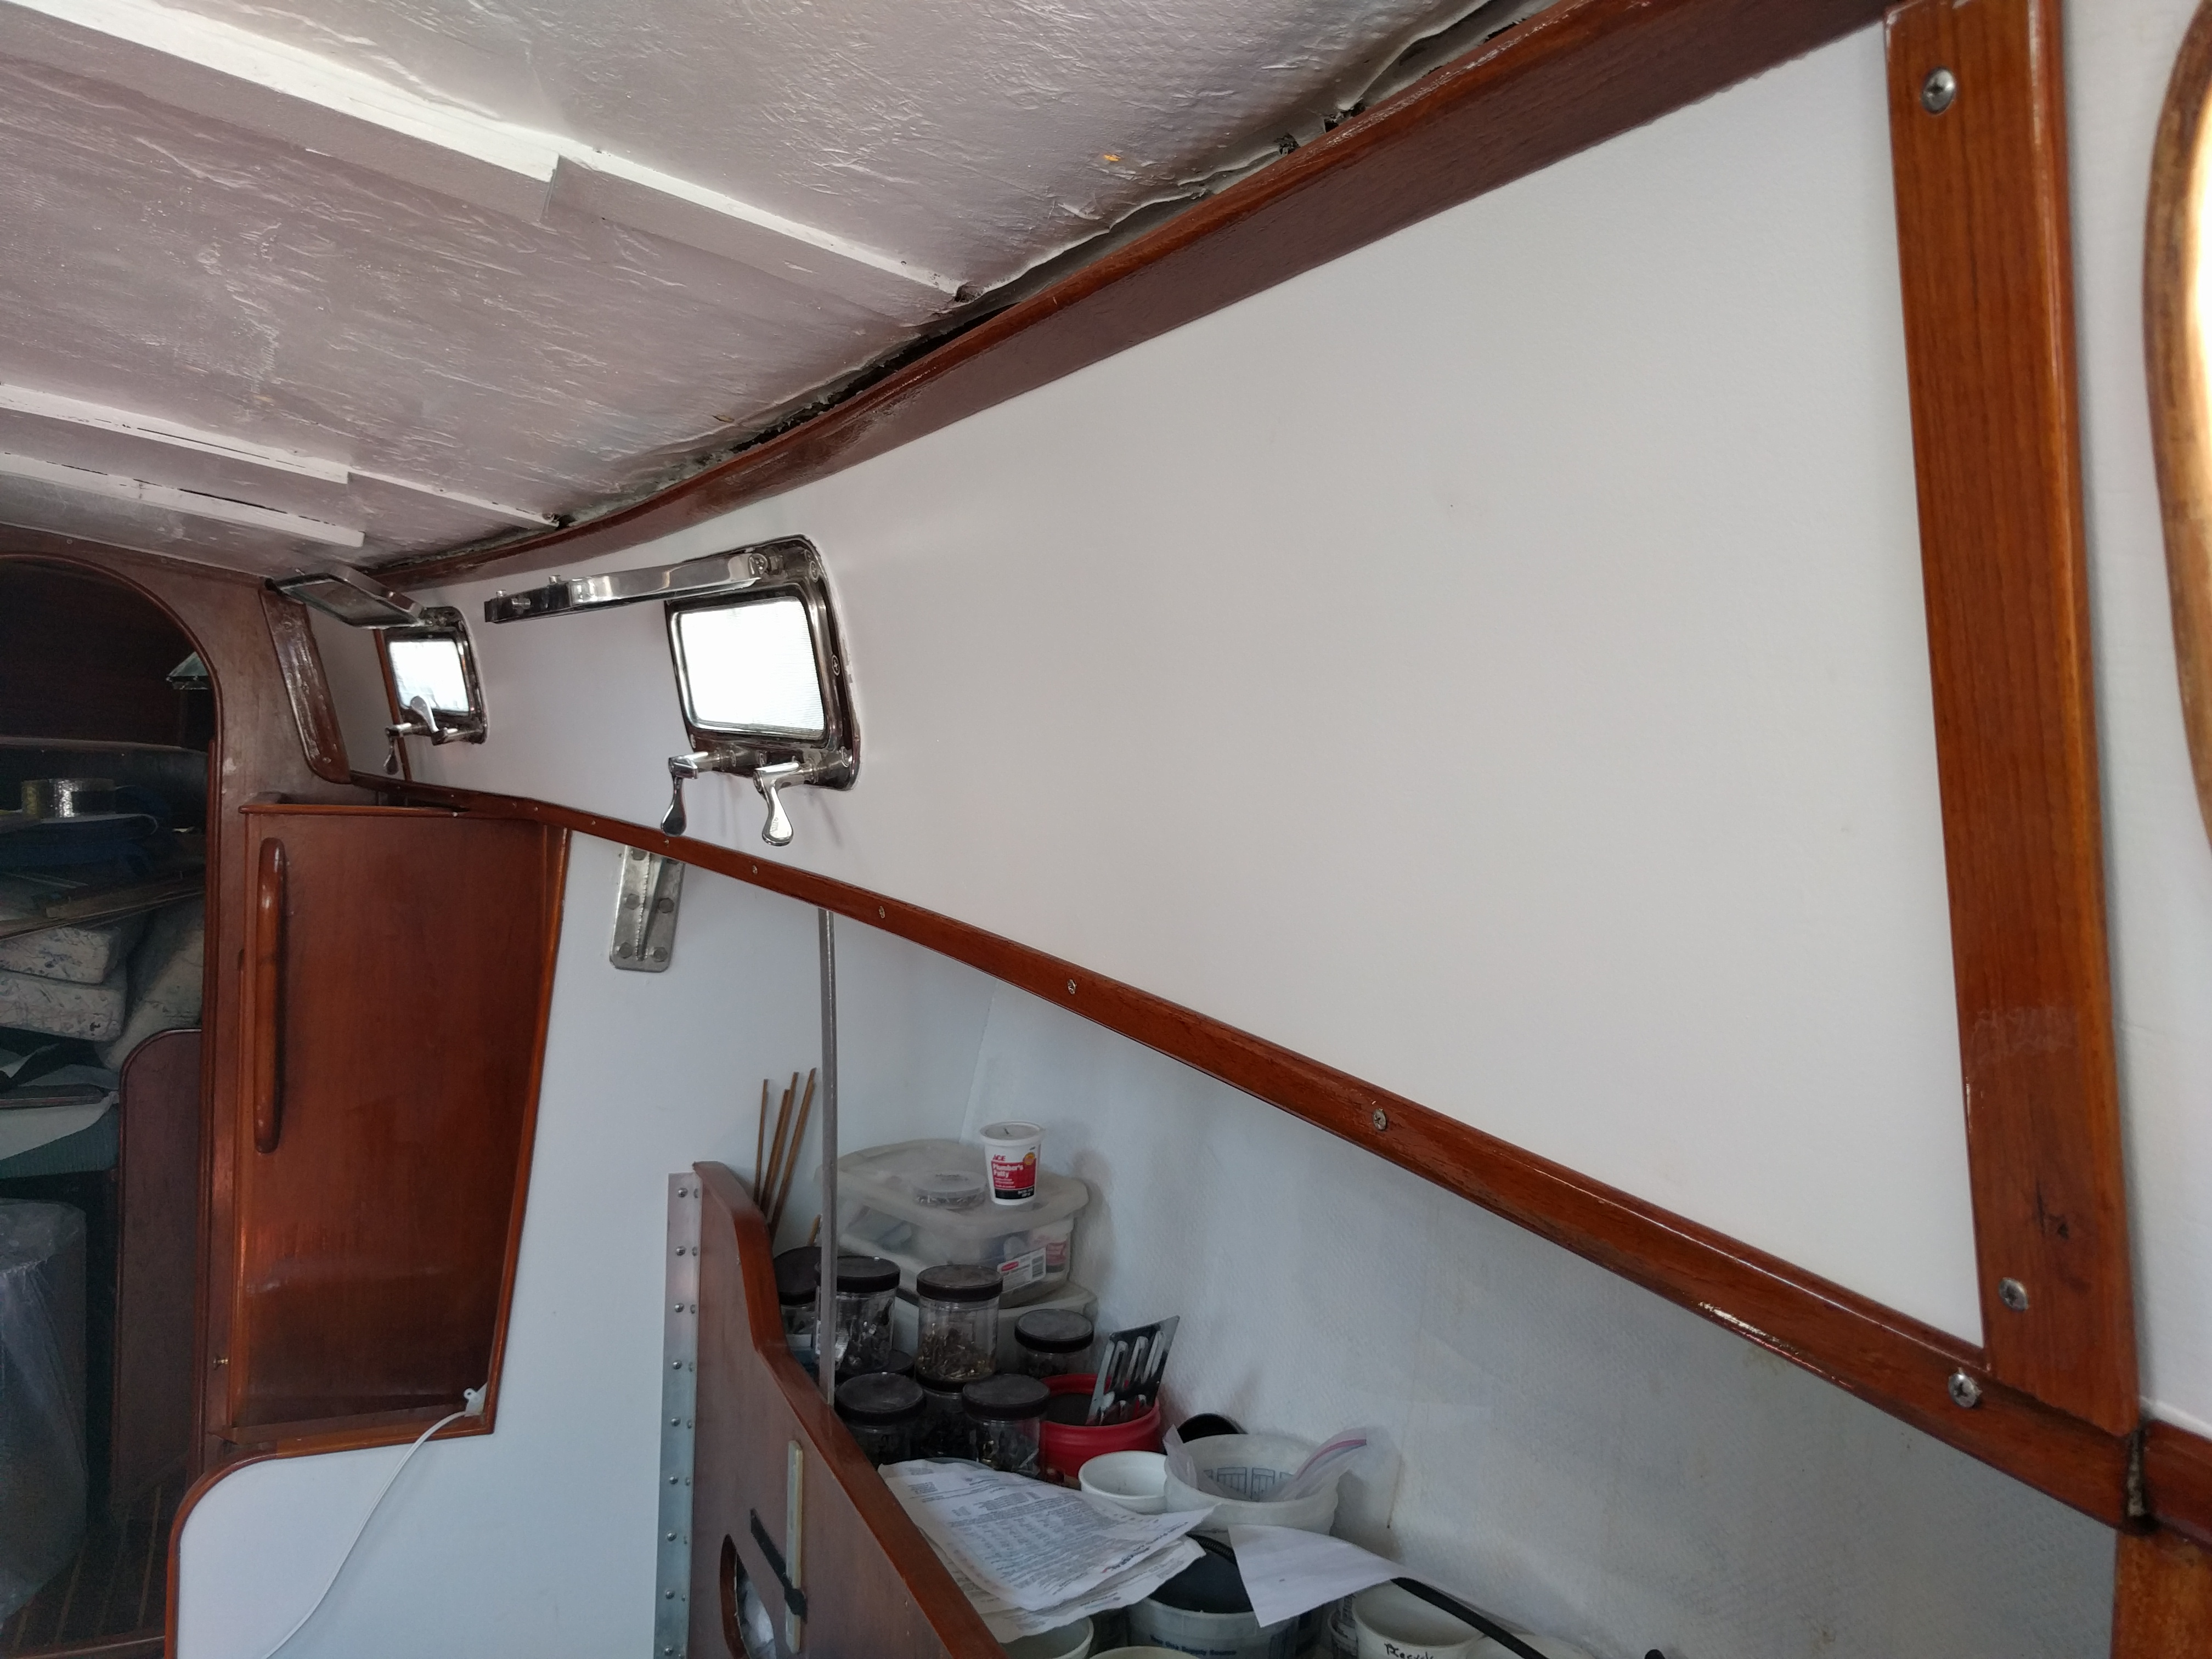 White paint and refinished trim in starboard salon